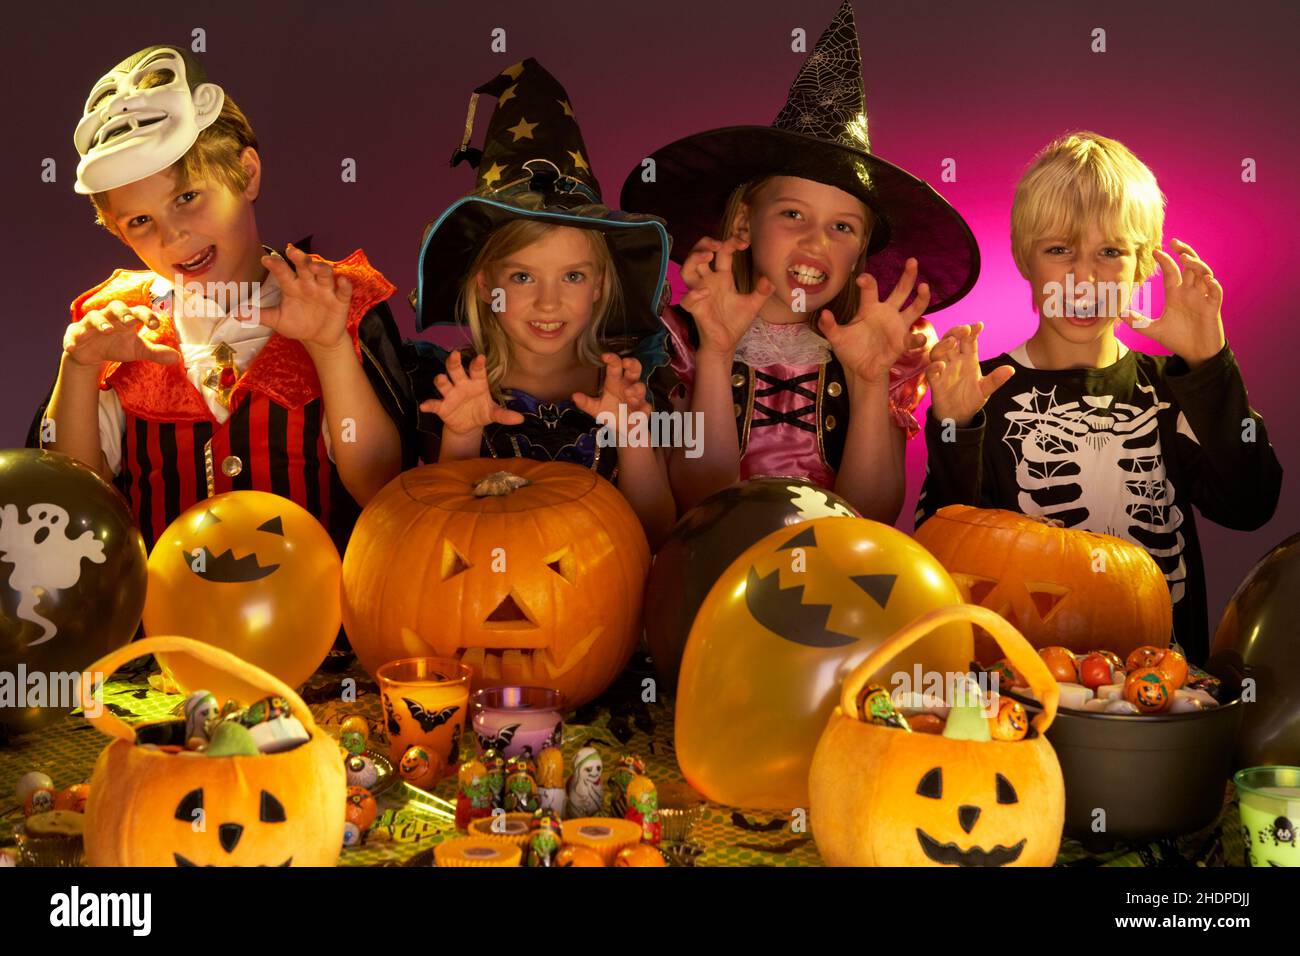 frighten, stage costume, halloween, frights, stage costumes, halloweens Stock Photo